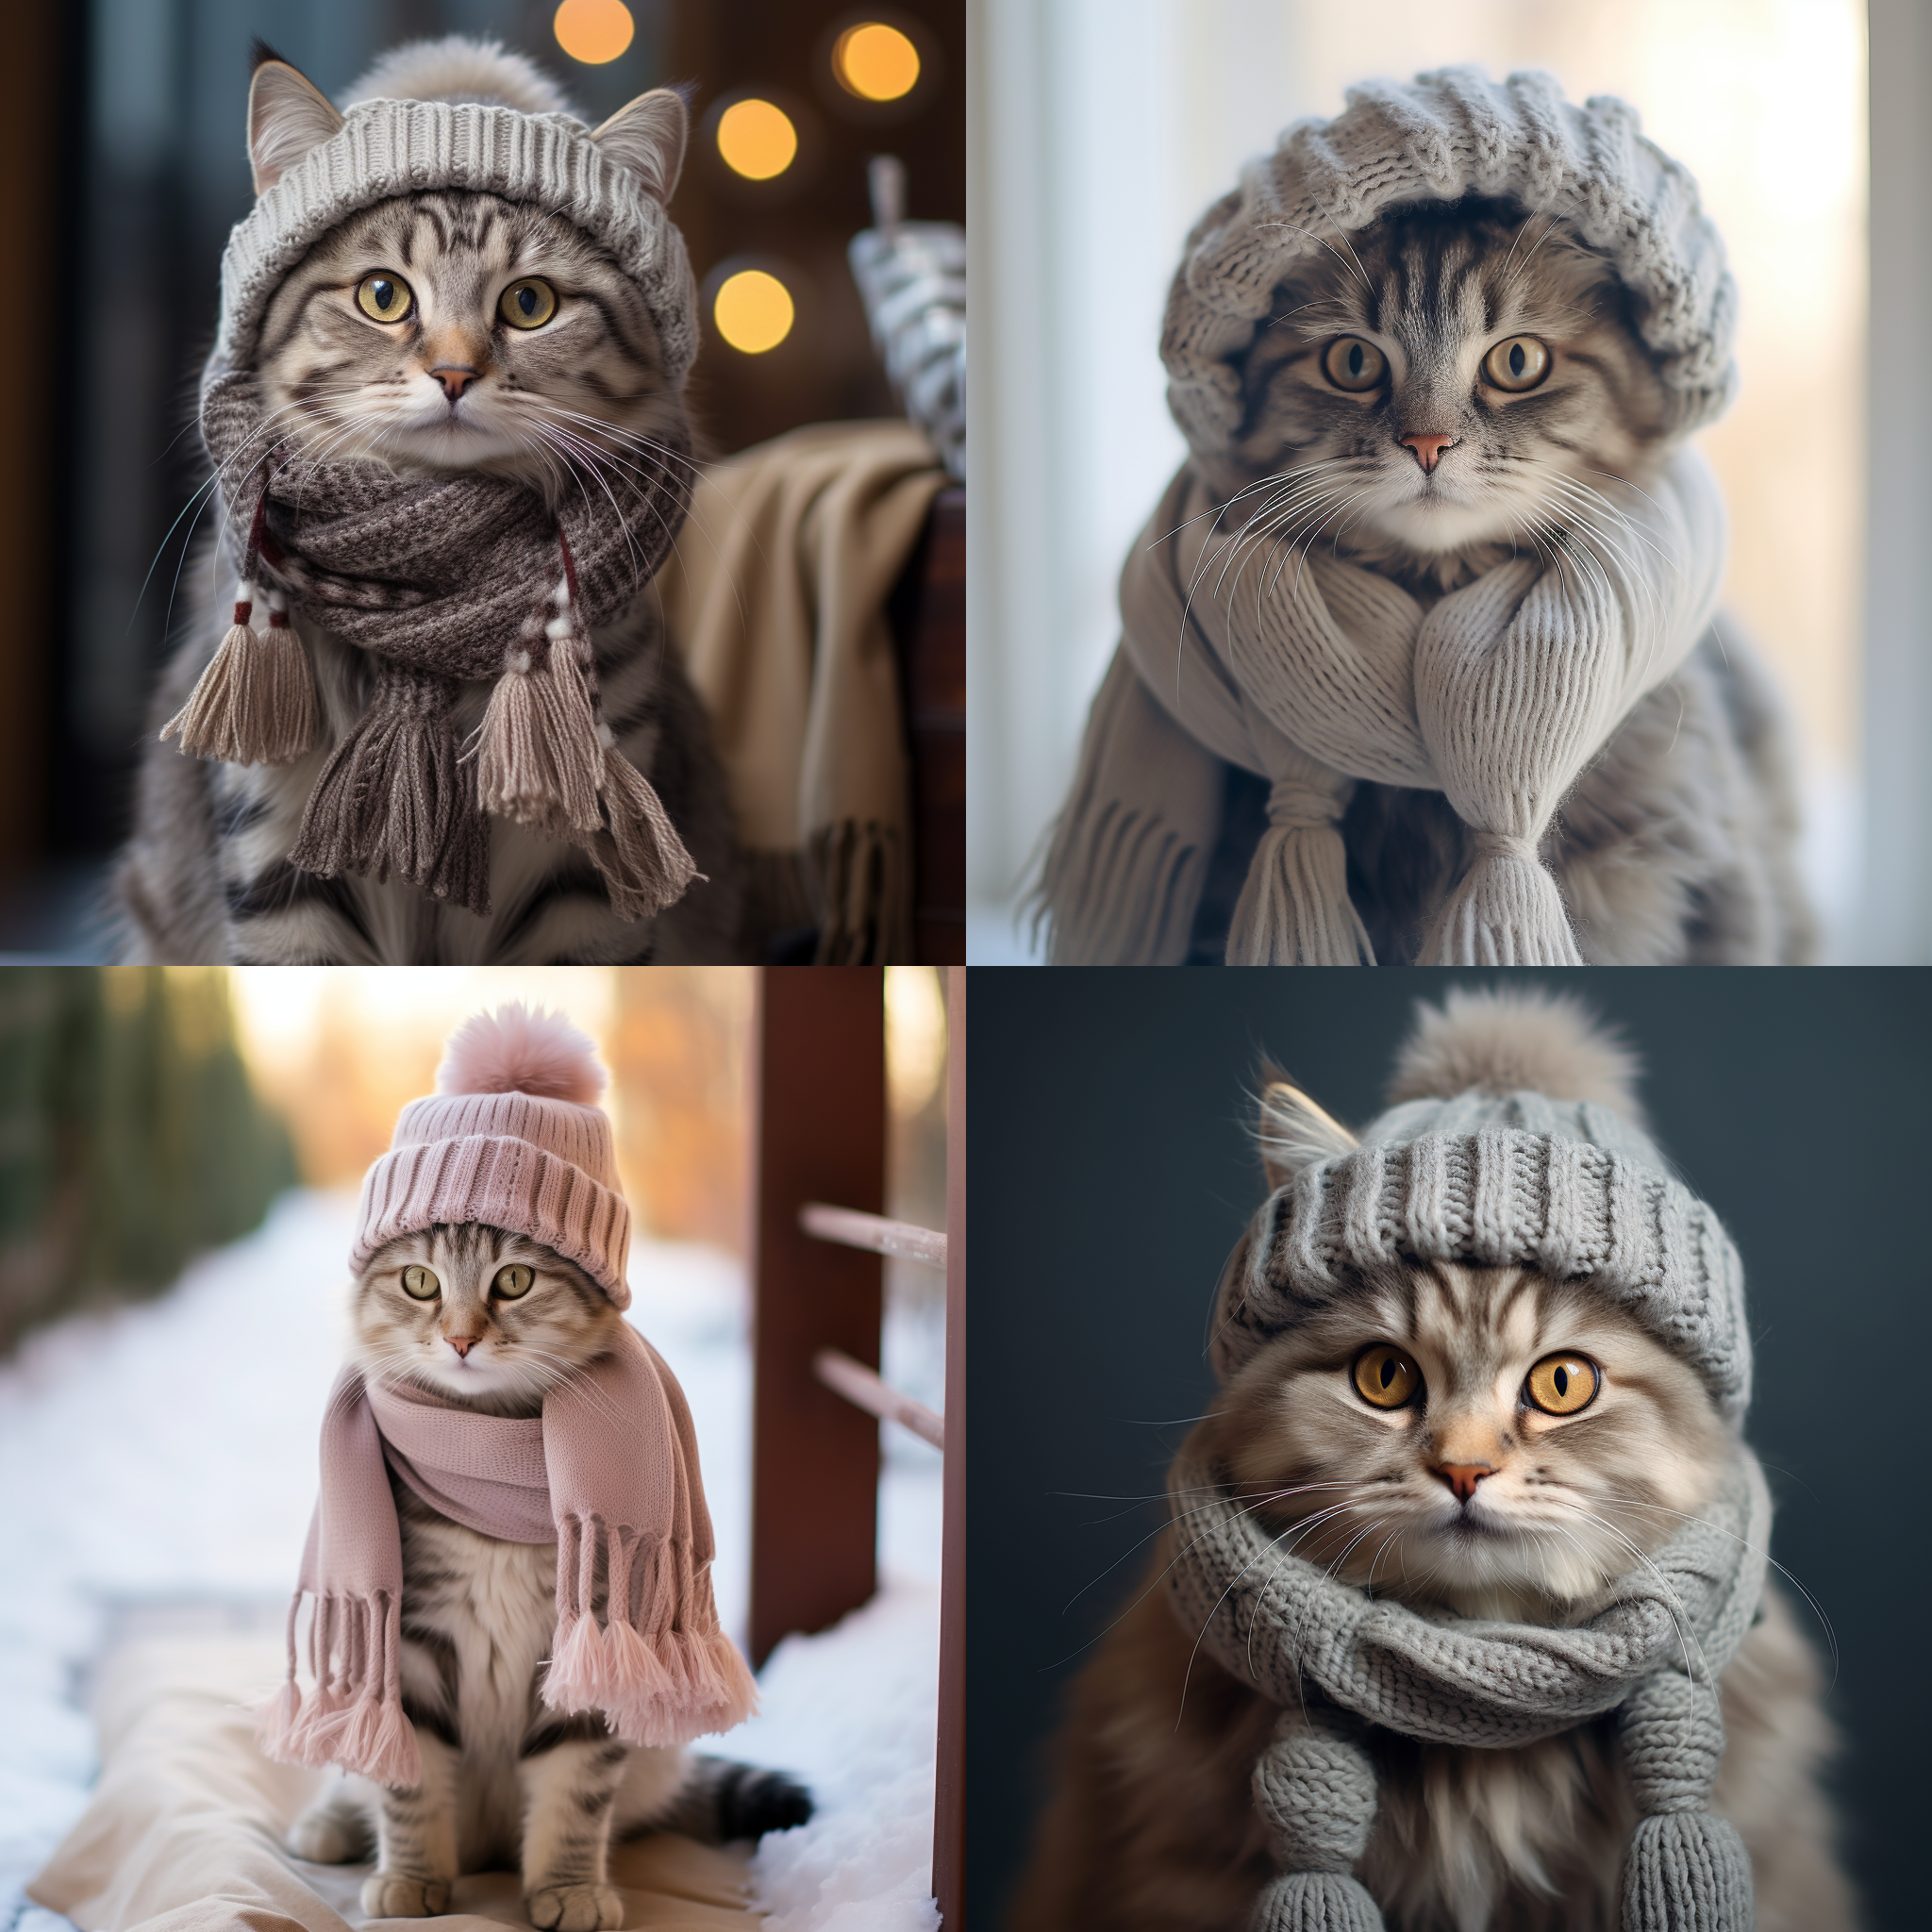 A stylish cat wearing a winter hat, cozy scarf, and adorable little boots